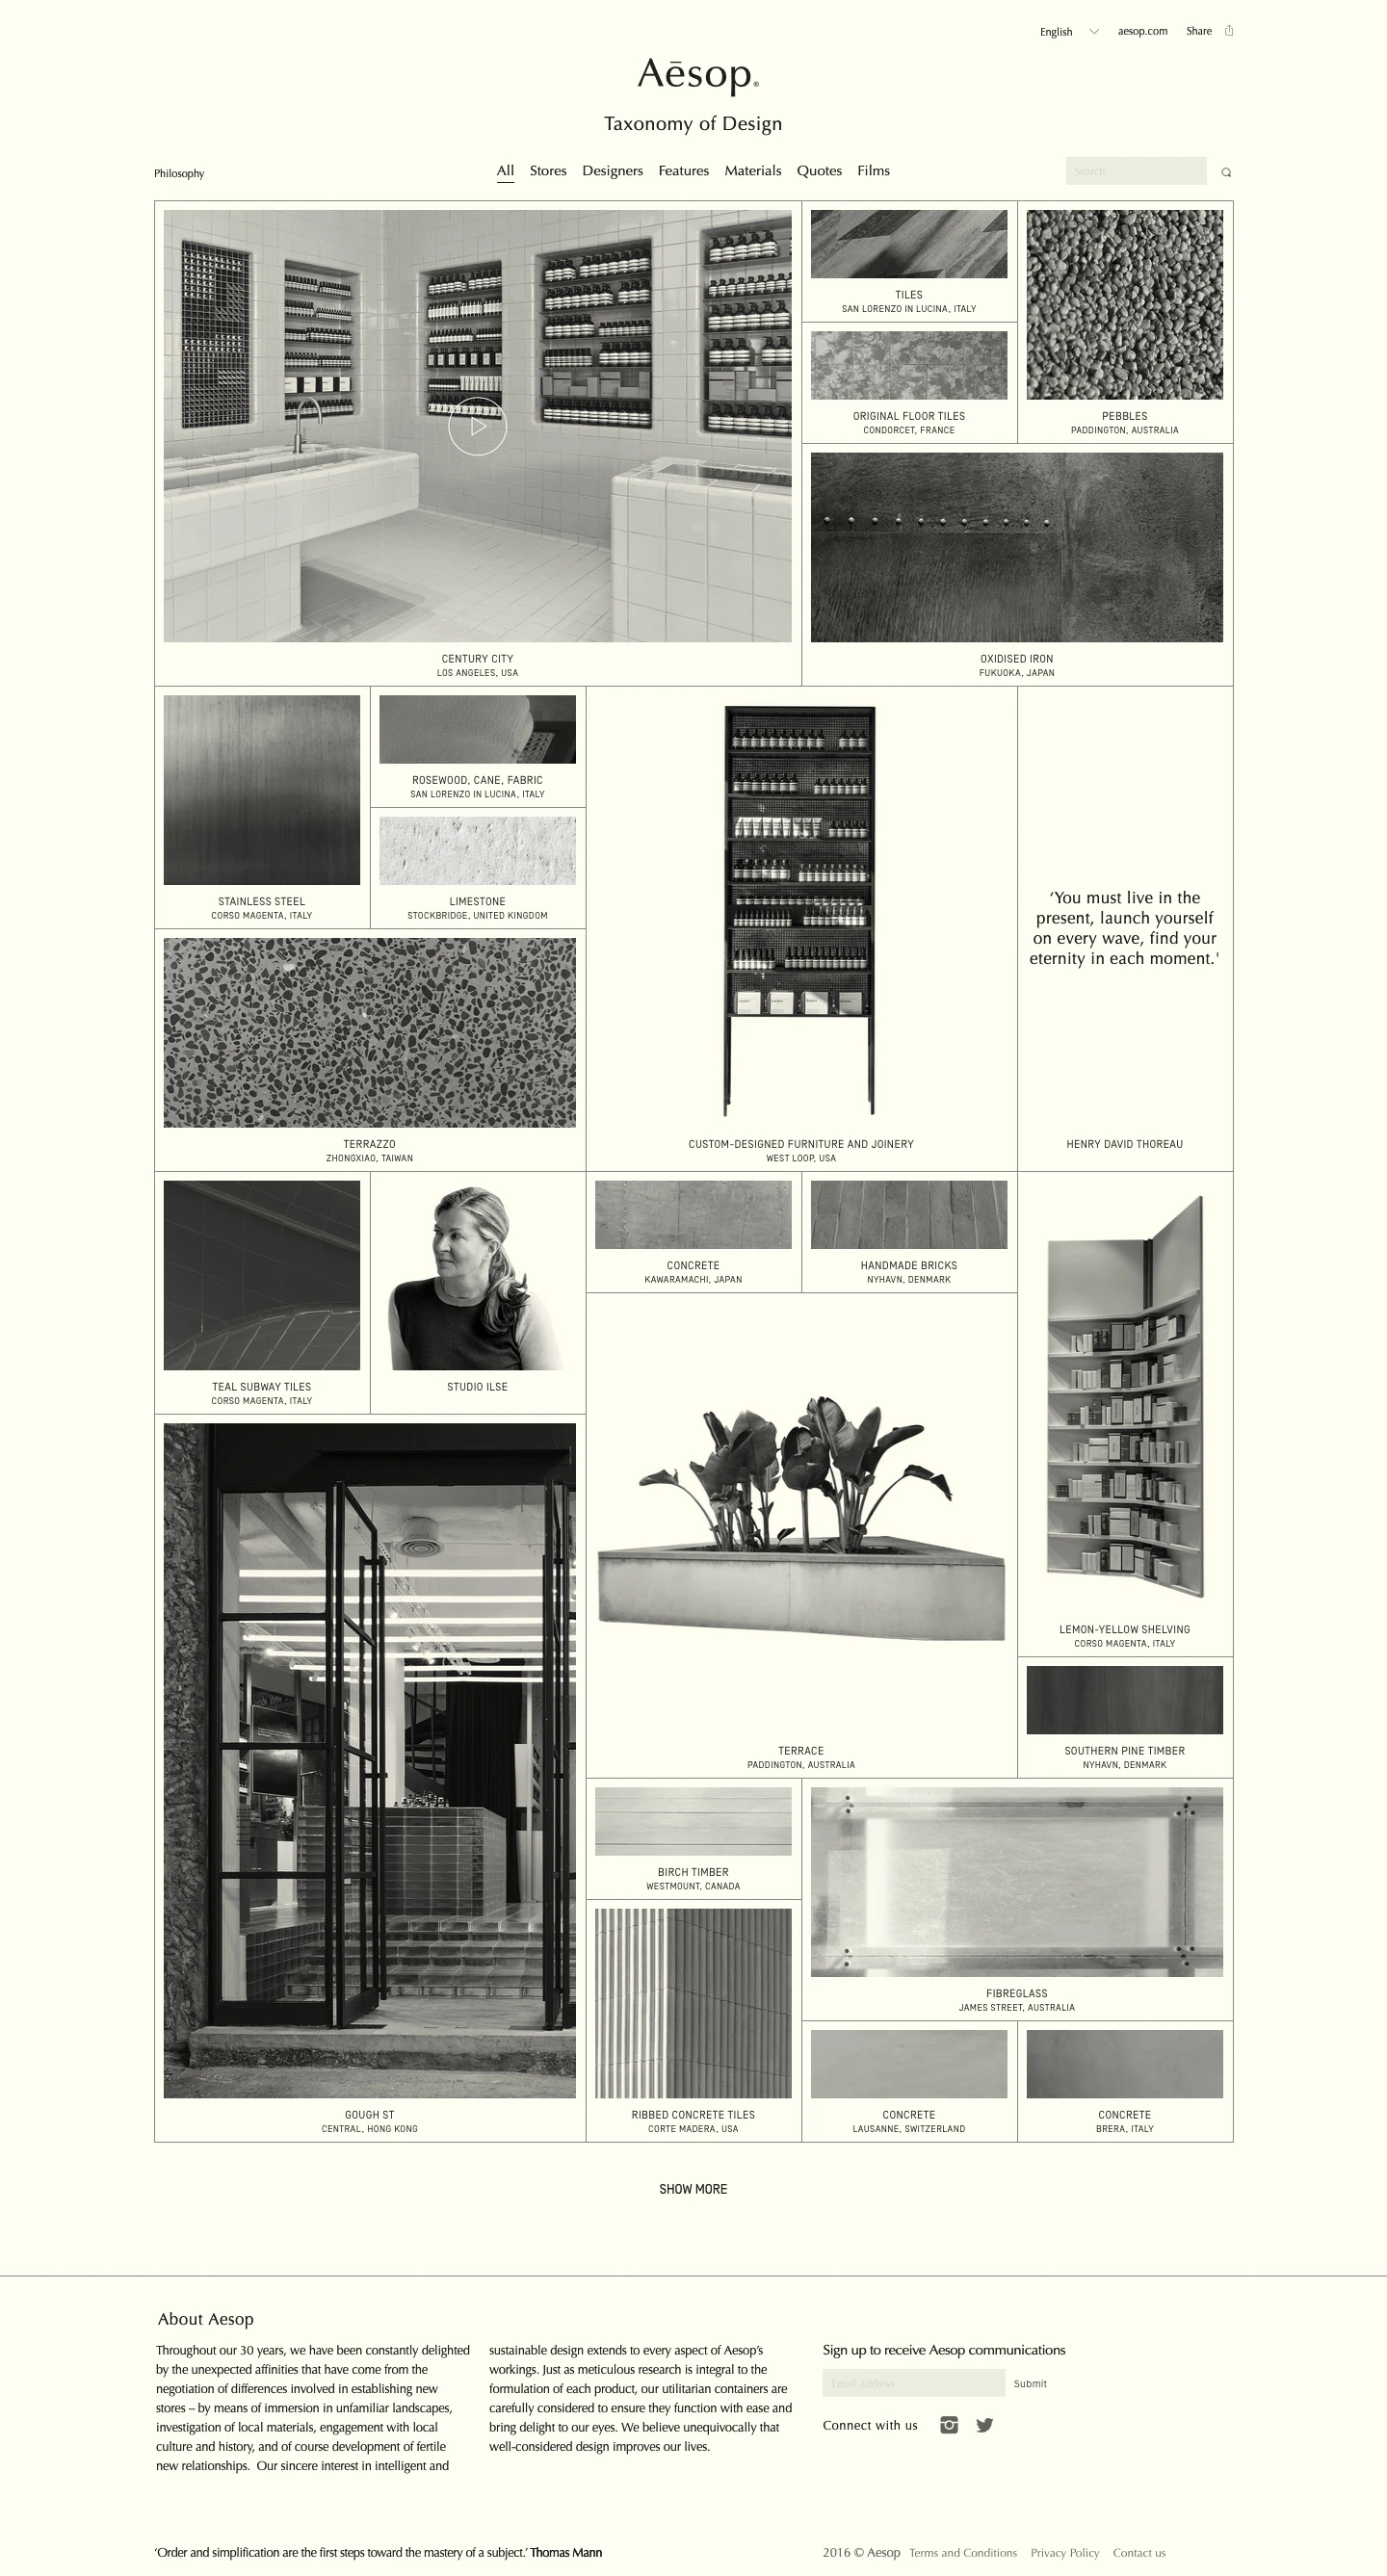 Taxonomy of Design Landing Page Example: Taxonomy of Design is a digital compendium of our signature stores which pays tribute to the creative processes, materials and features that distinguish Aesop spaces, and to the designers and architects with whom we collaborate.